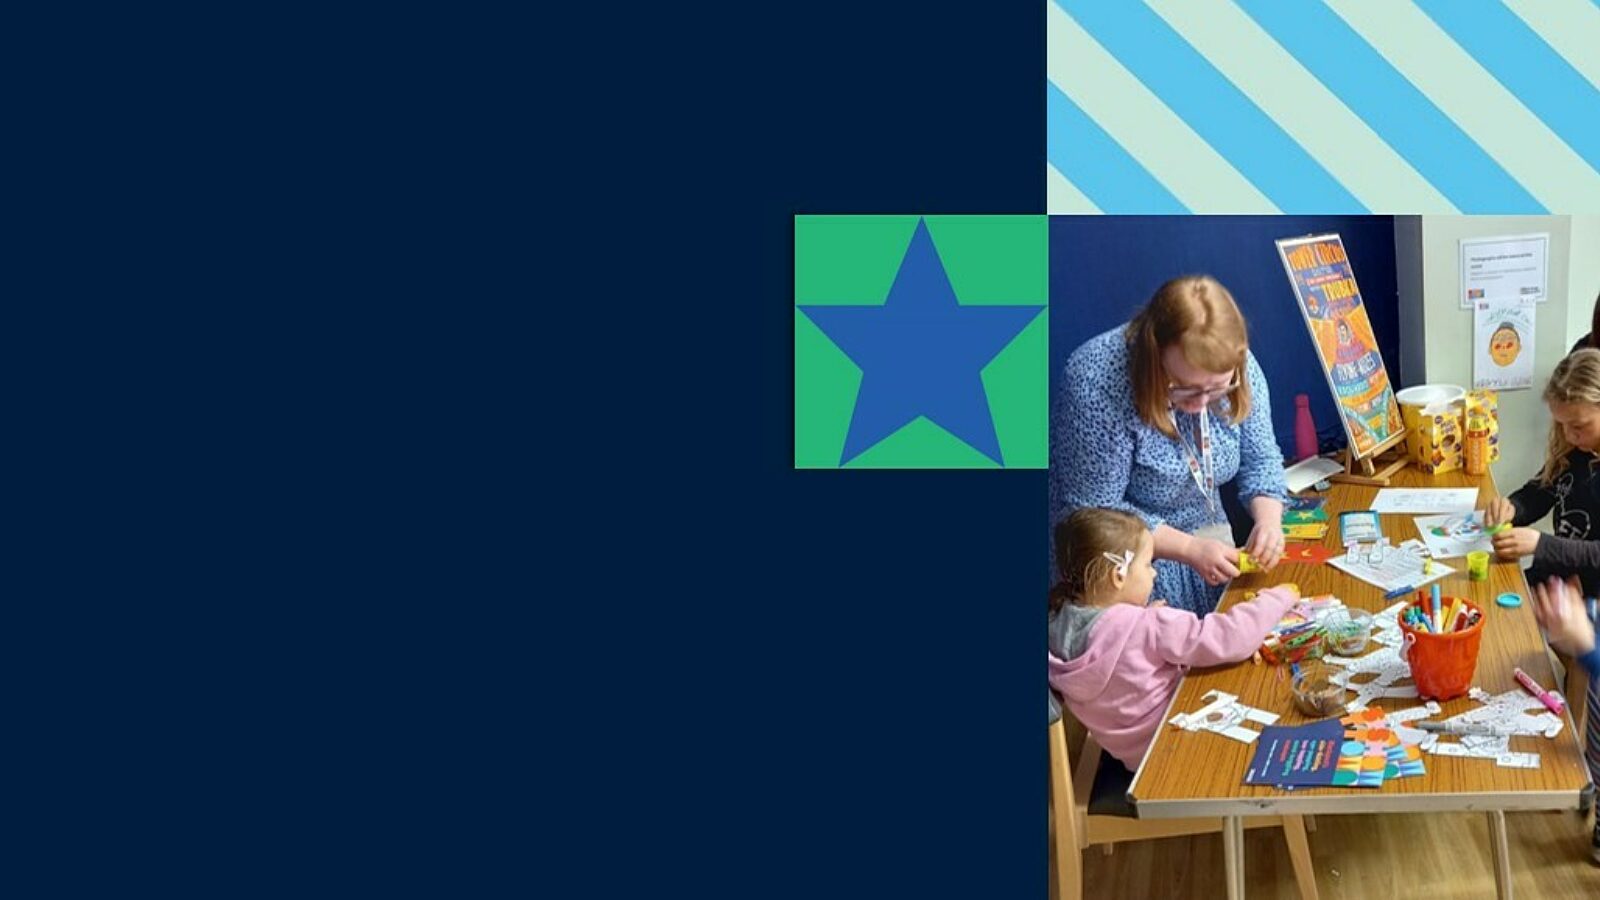 Blue star in green block next to an image of children sitting at a table doing circus craft.